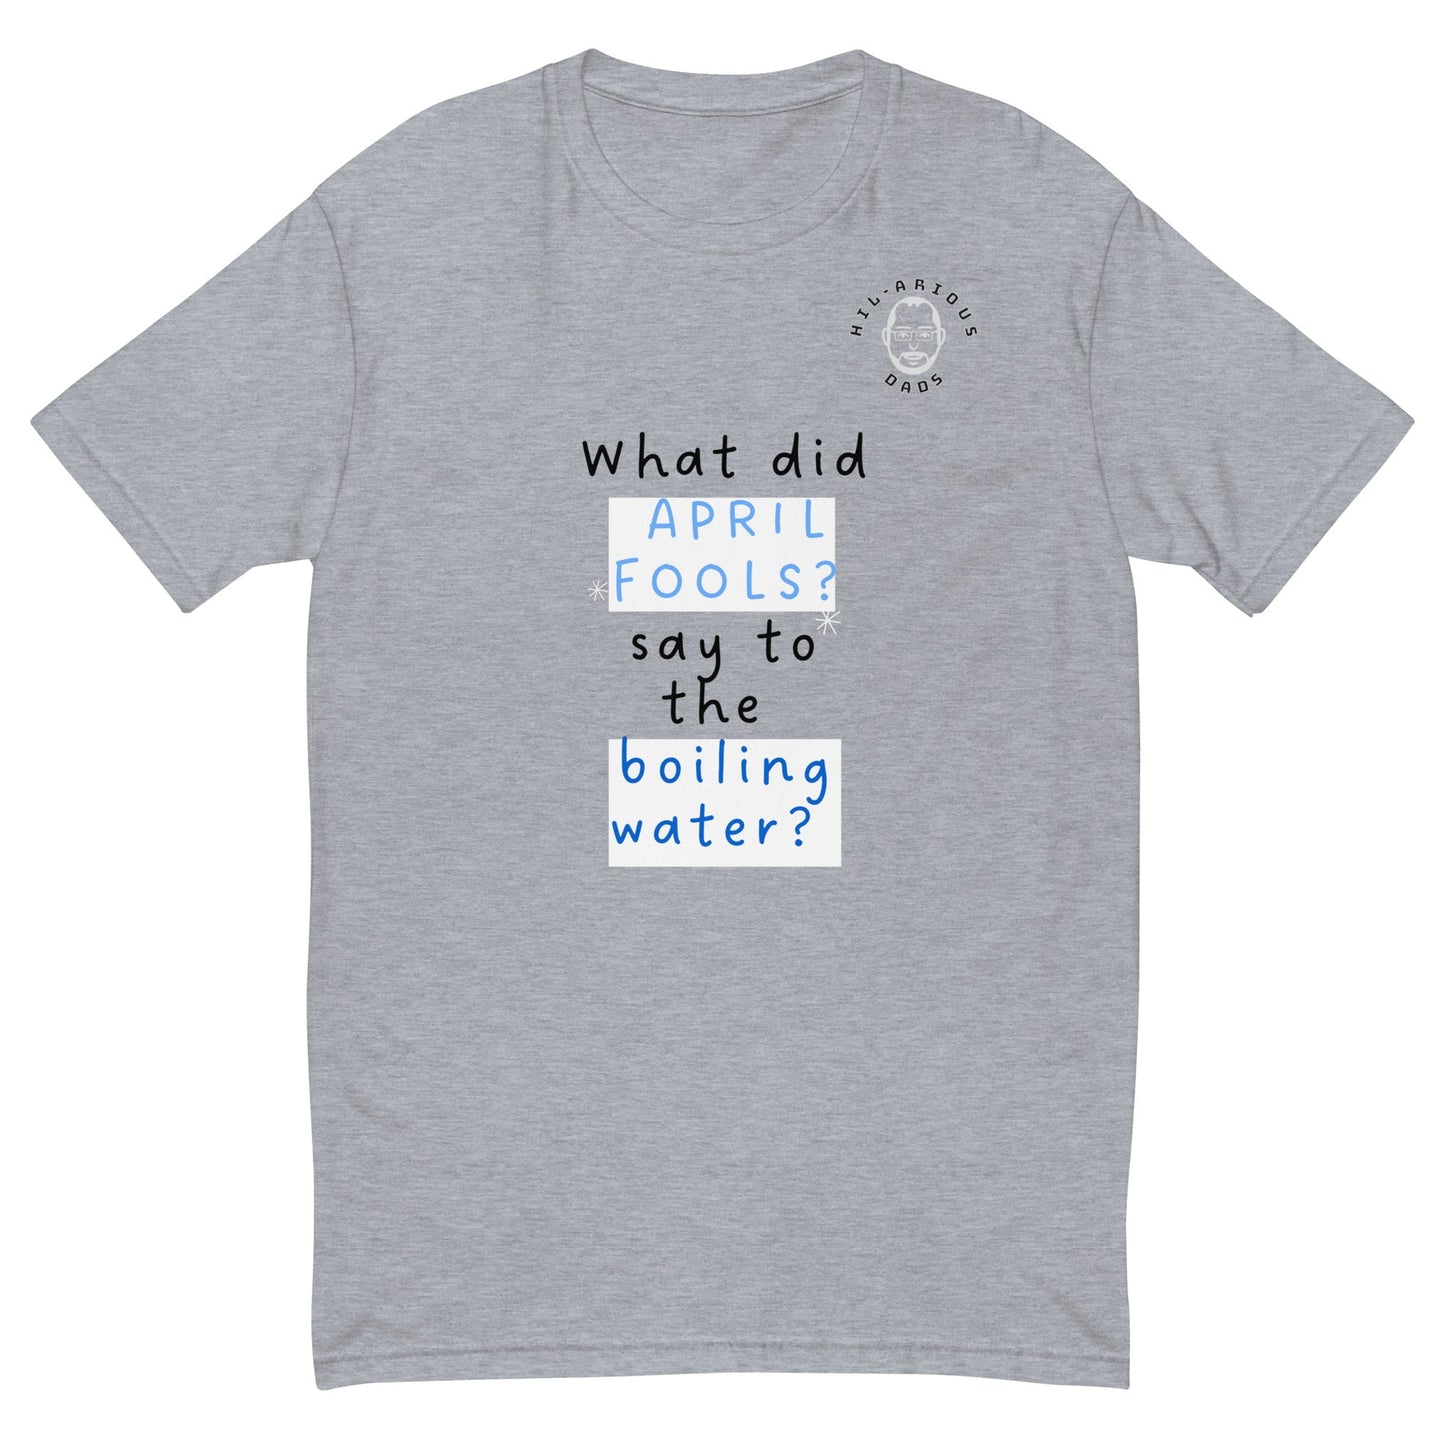 What did April Fools say to the boiling water?-T-shirt - Hil-arious Dads